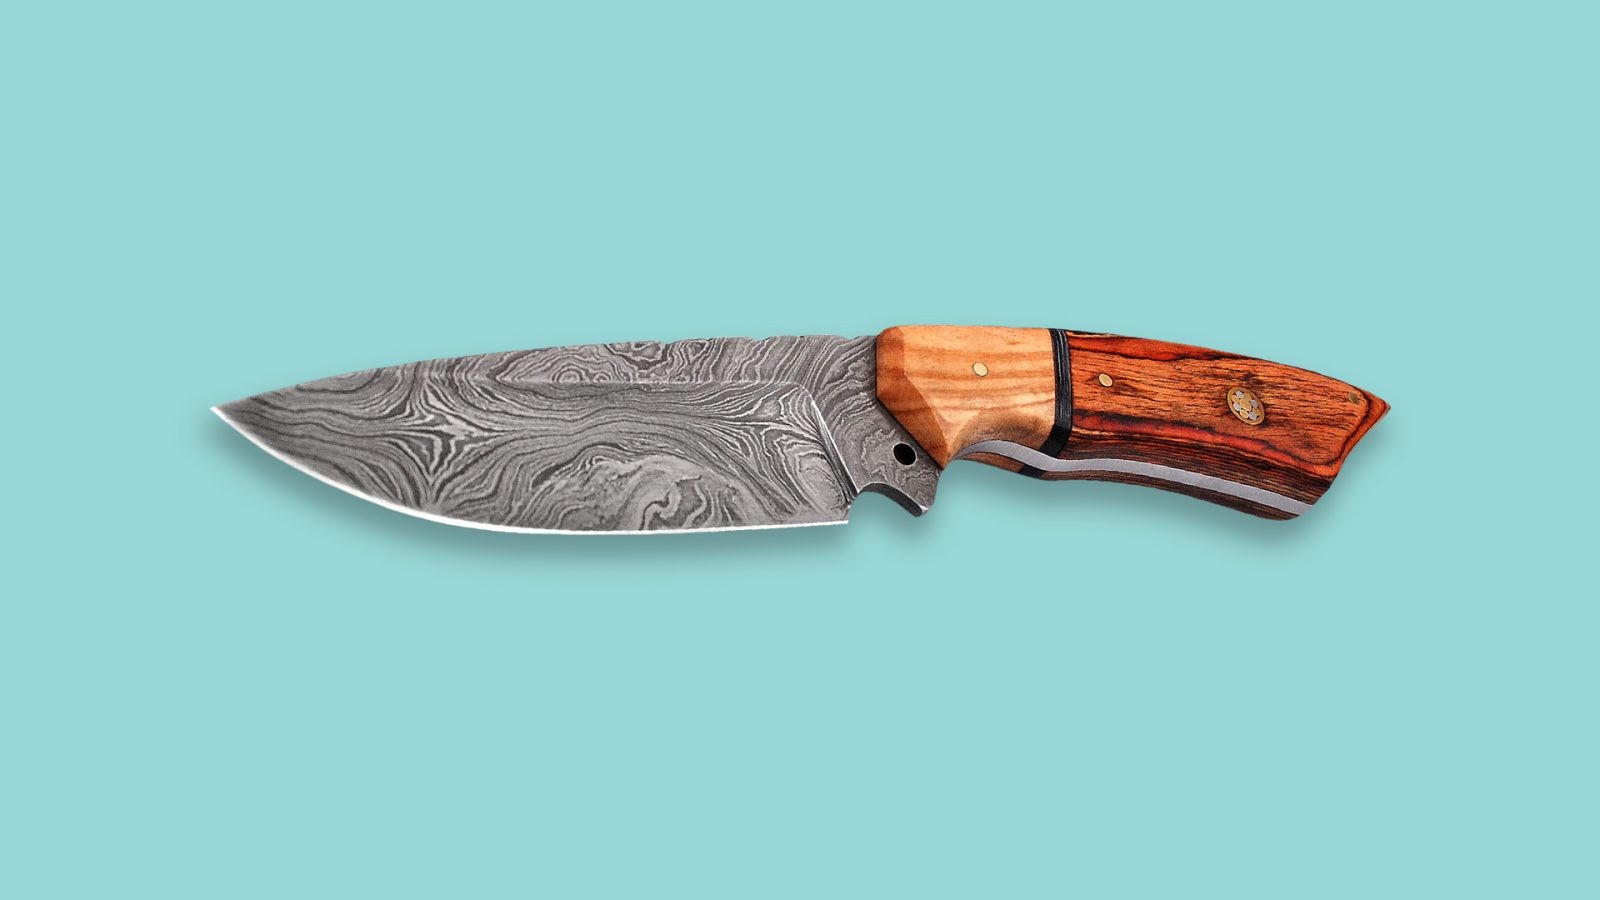 How To Tell If A Knife Is Real Damascus